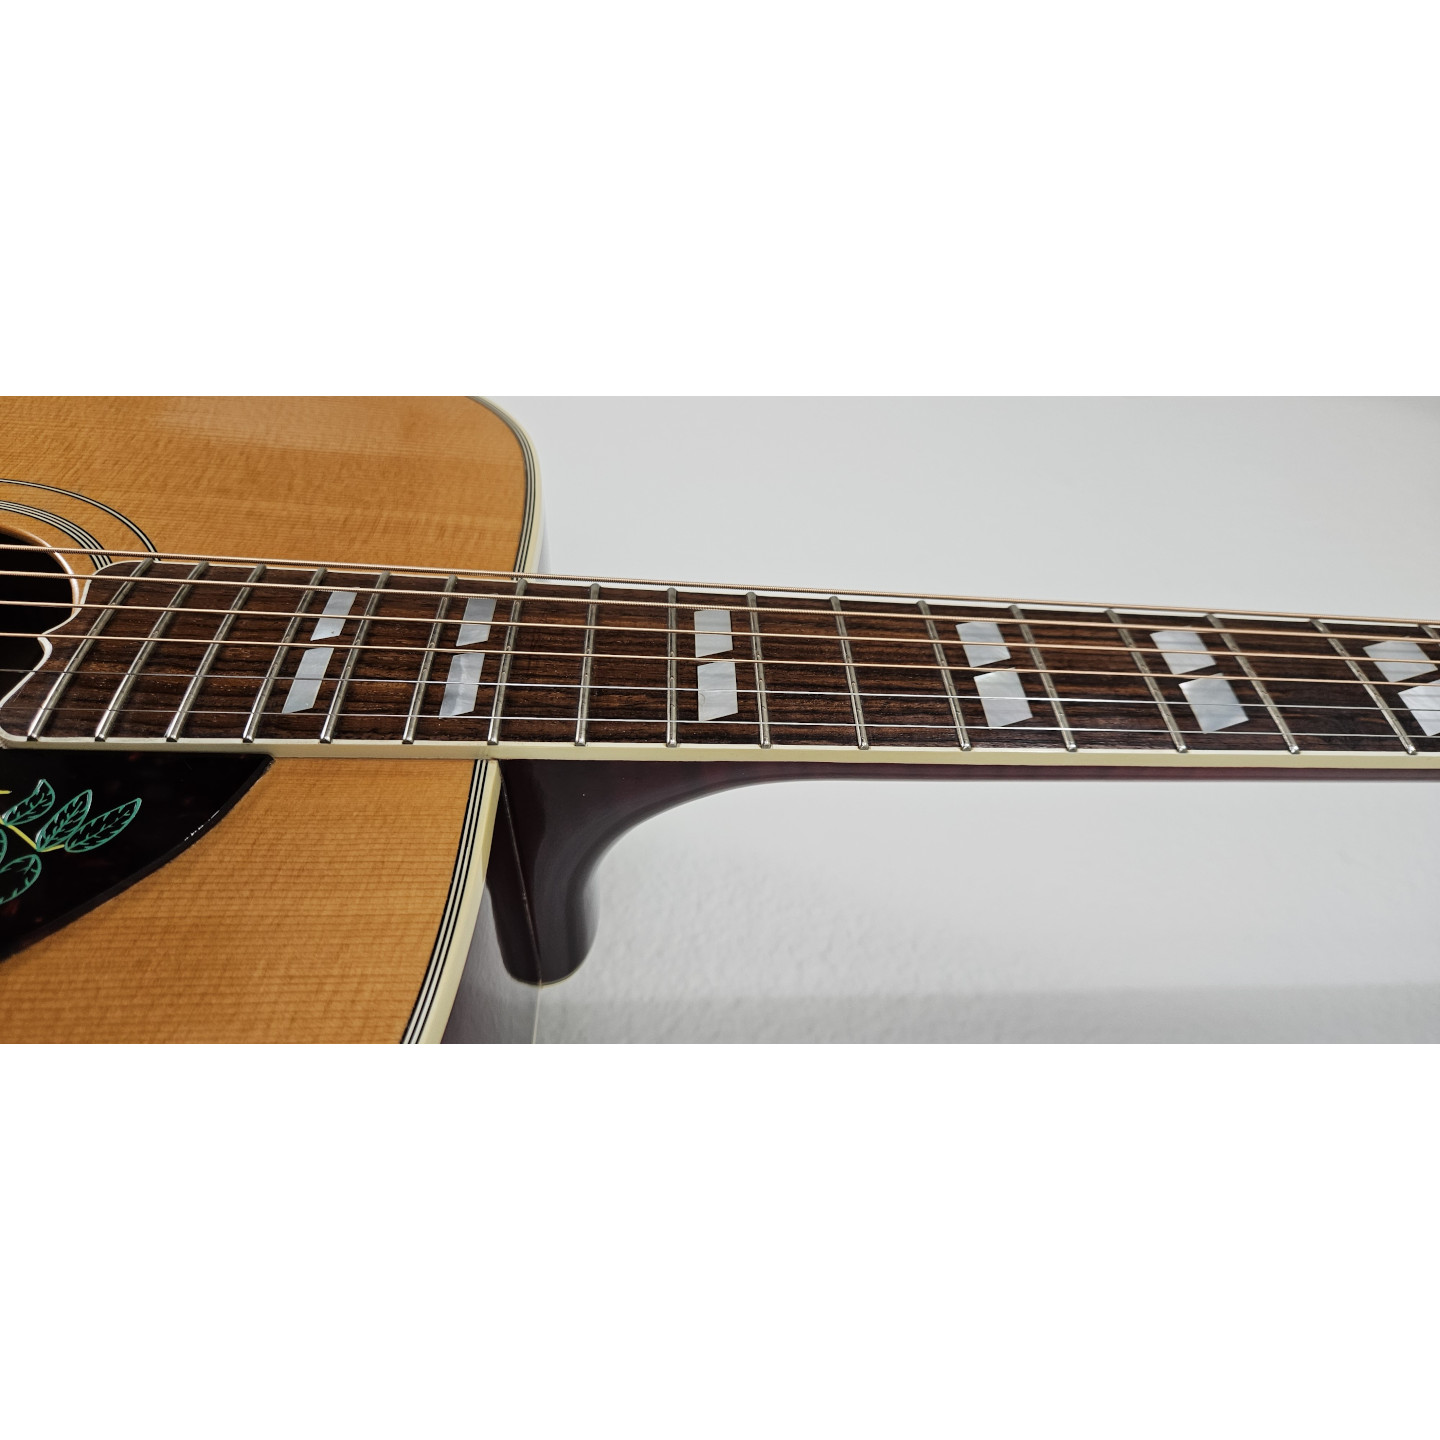 1997 Gibson Custom Shop Dove In Flight Limited Edition Acoustic Guitar